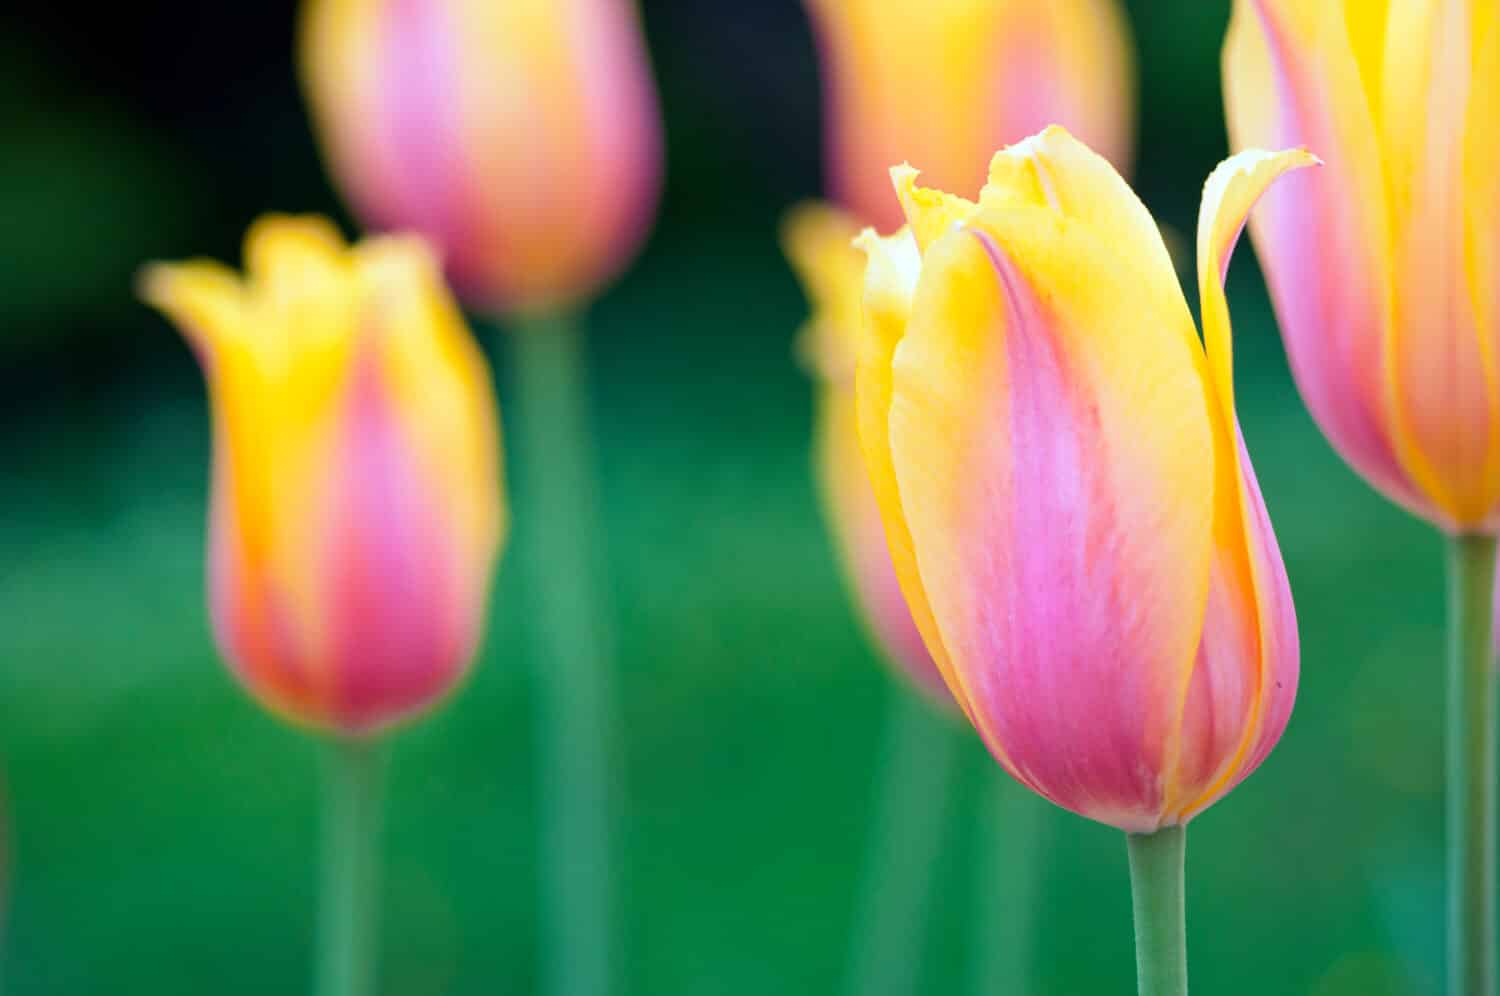 A many early Tulip Hybrids – Blushing Lady, has yellow with pink petals. Blooming yellow with pink tulips on blurred background. Beautiful flowers as floral natural backdrop.